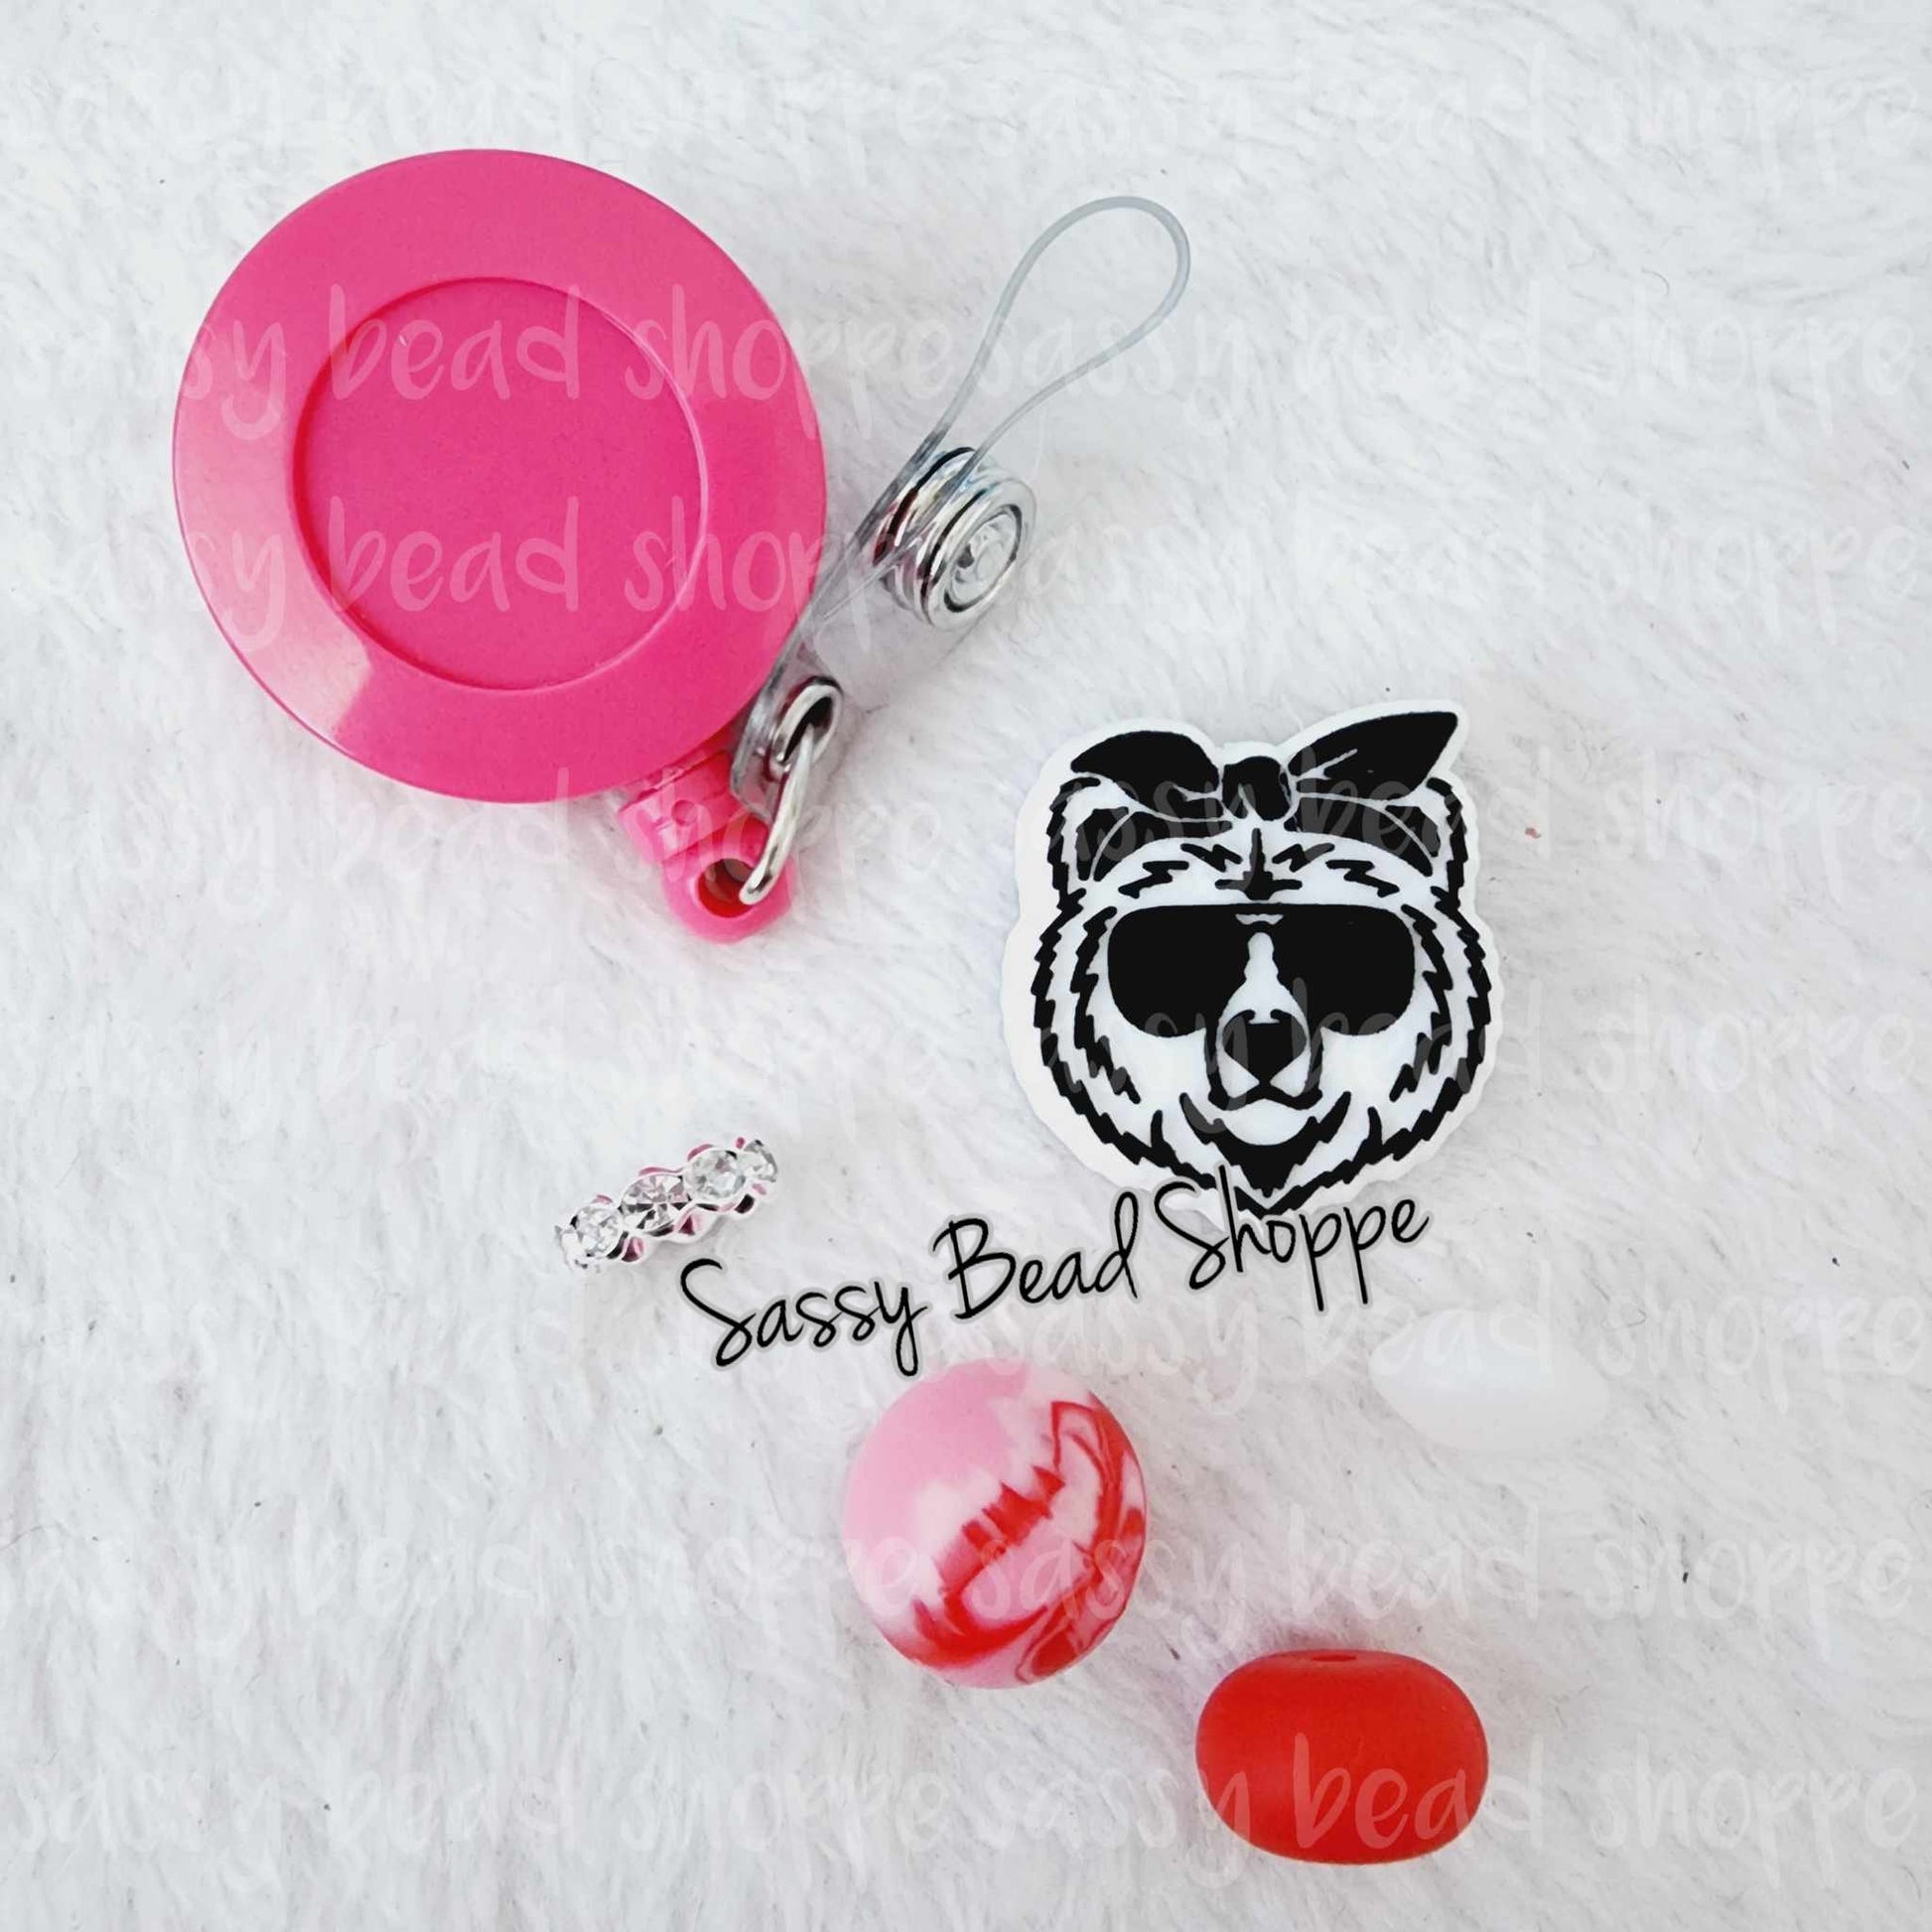 Sassy Bead Shoppe Mama Bear Life Badge Reel What you will receive in your kit